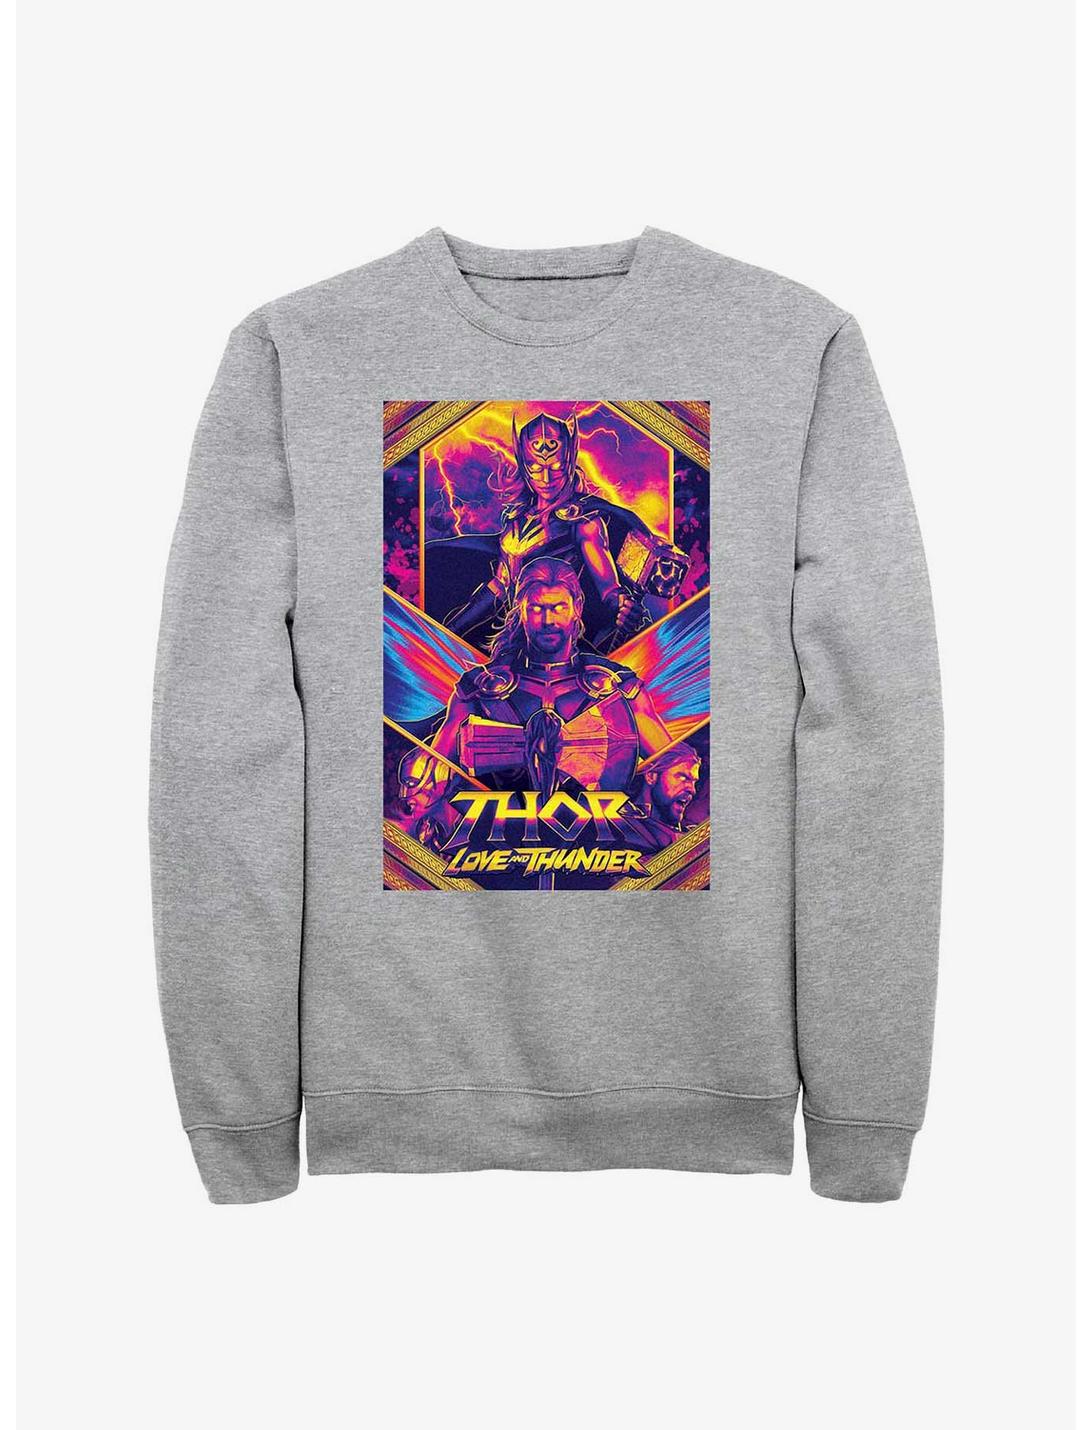 Marvel Thor: Love And Thunder Neon Poster Sweatshirt, ATH HTR, hi-res